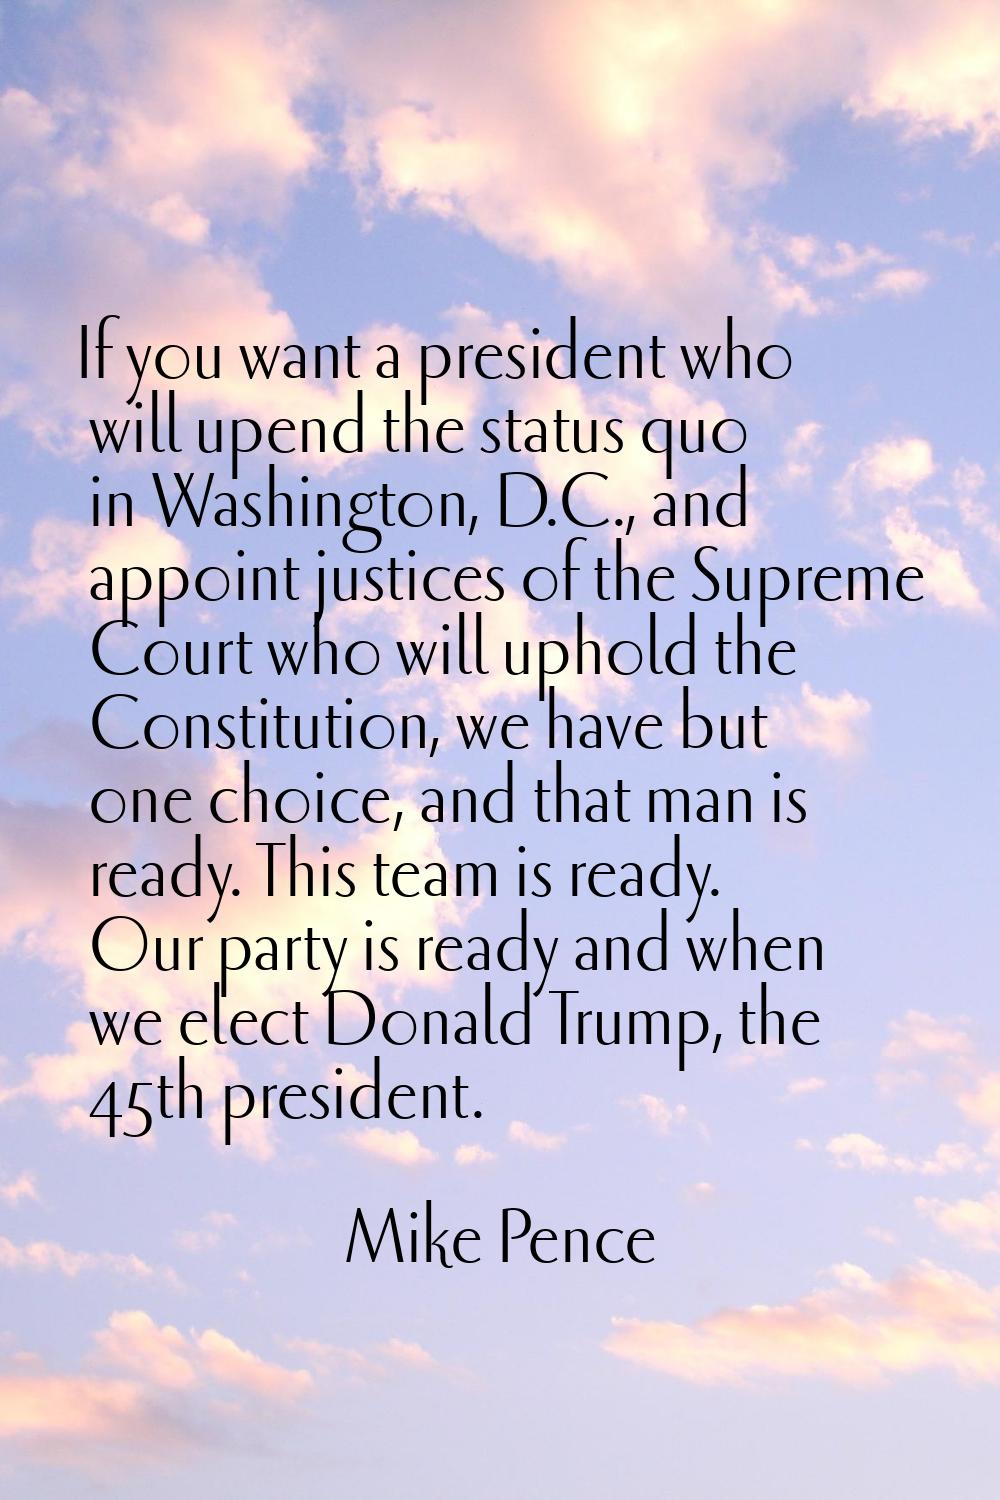 If you want a president who will upend the status quo in Washington, D.C., and appoint justices of 